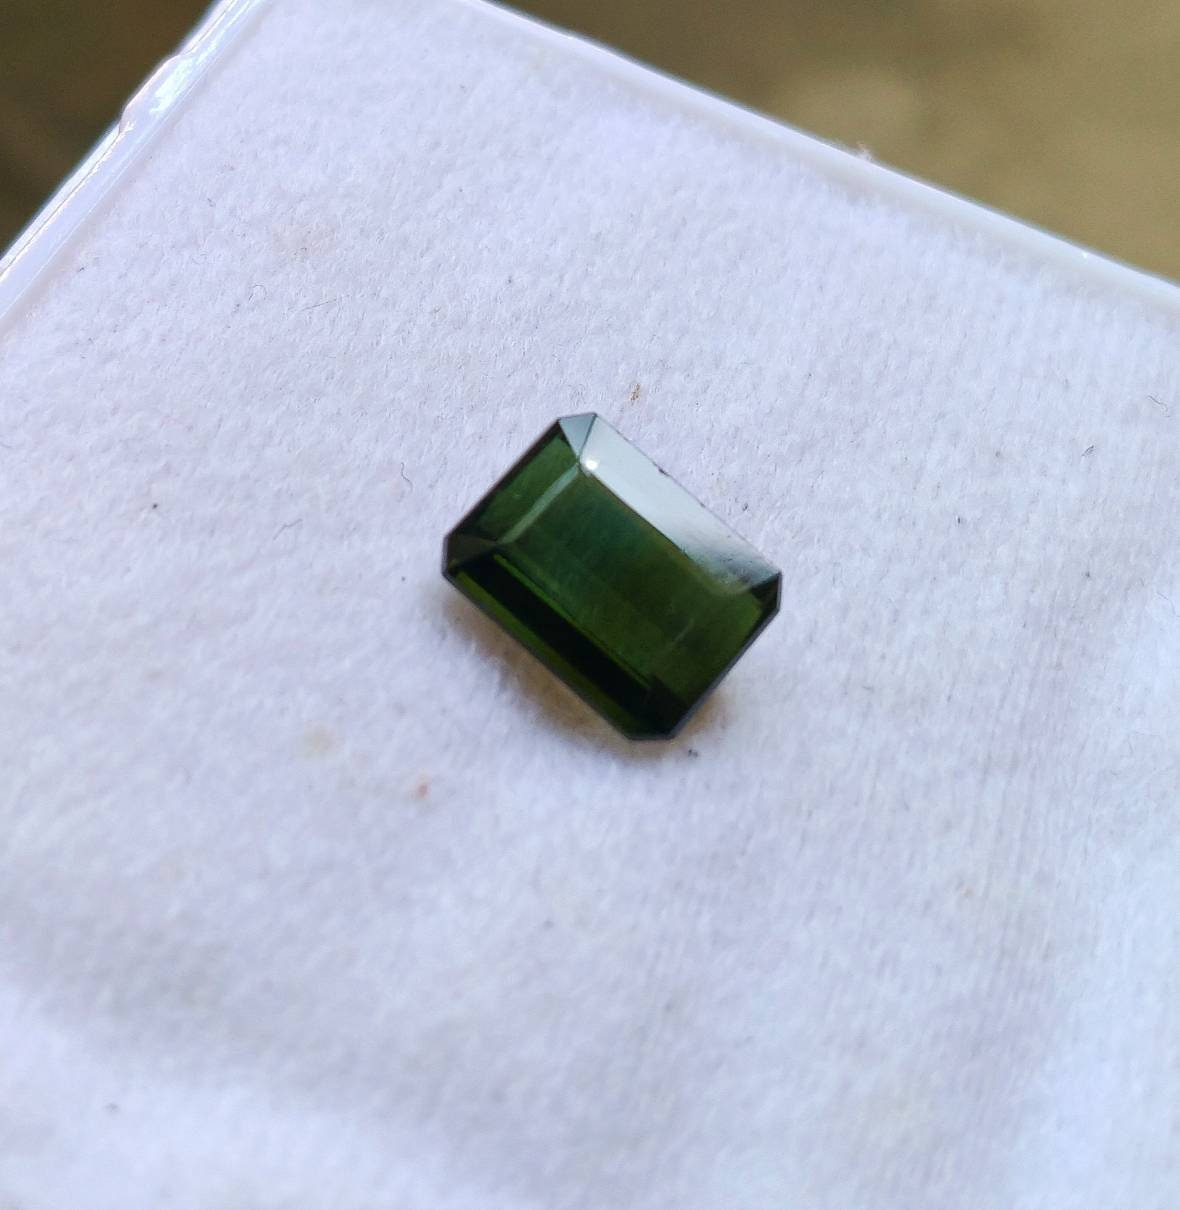 ARSAA GEMS AND MINERALSNatural top quality beautiful 4 carats faceted radiant shape dark green tourmaline gem - Premium  from ARSAA GEMS AND MINERALS - Just $20.00! Shop now at ARSAA GEMS AND MINERALS